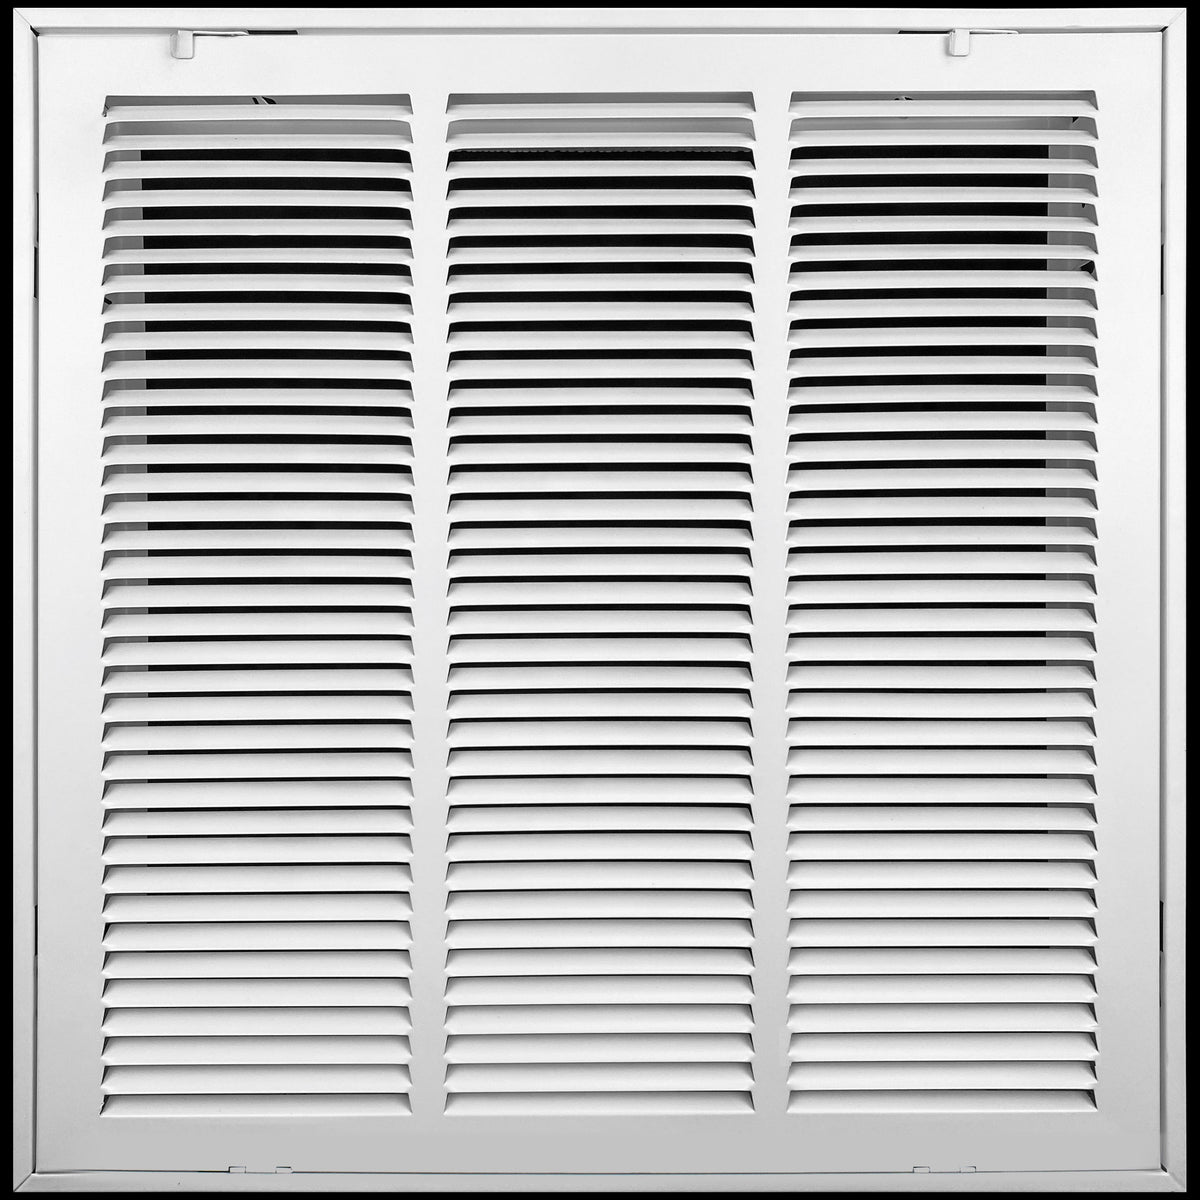 airgrilles 18" x 18" duct opening   steel return air filter grille  fixed hinged  for sidewall and ceiling hnd-fx-1rafg-wh-18x18 752505984513 - 1